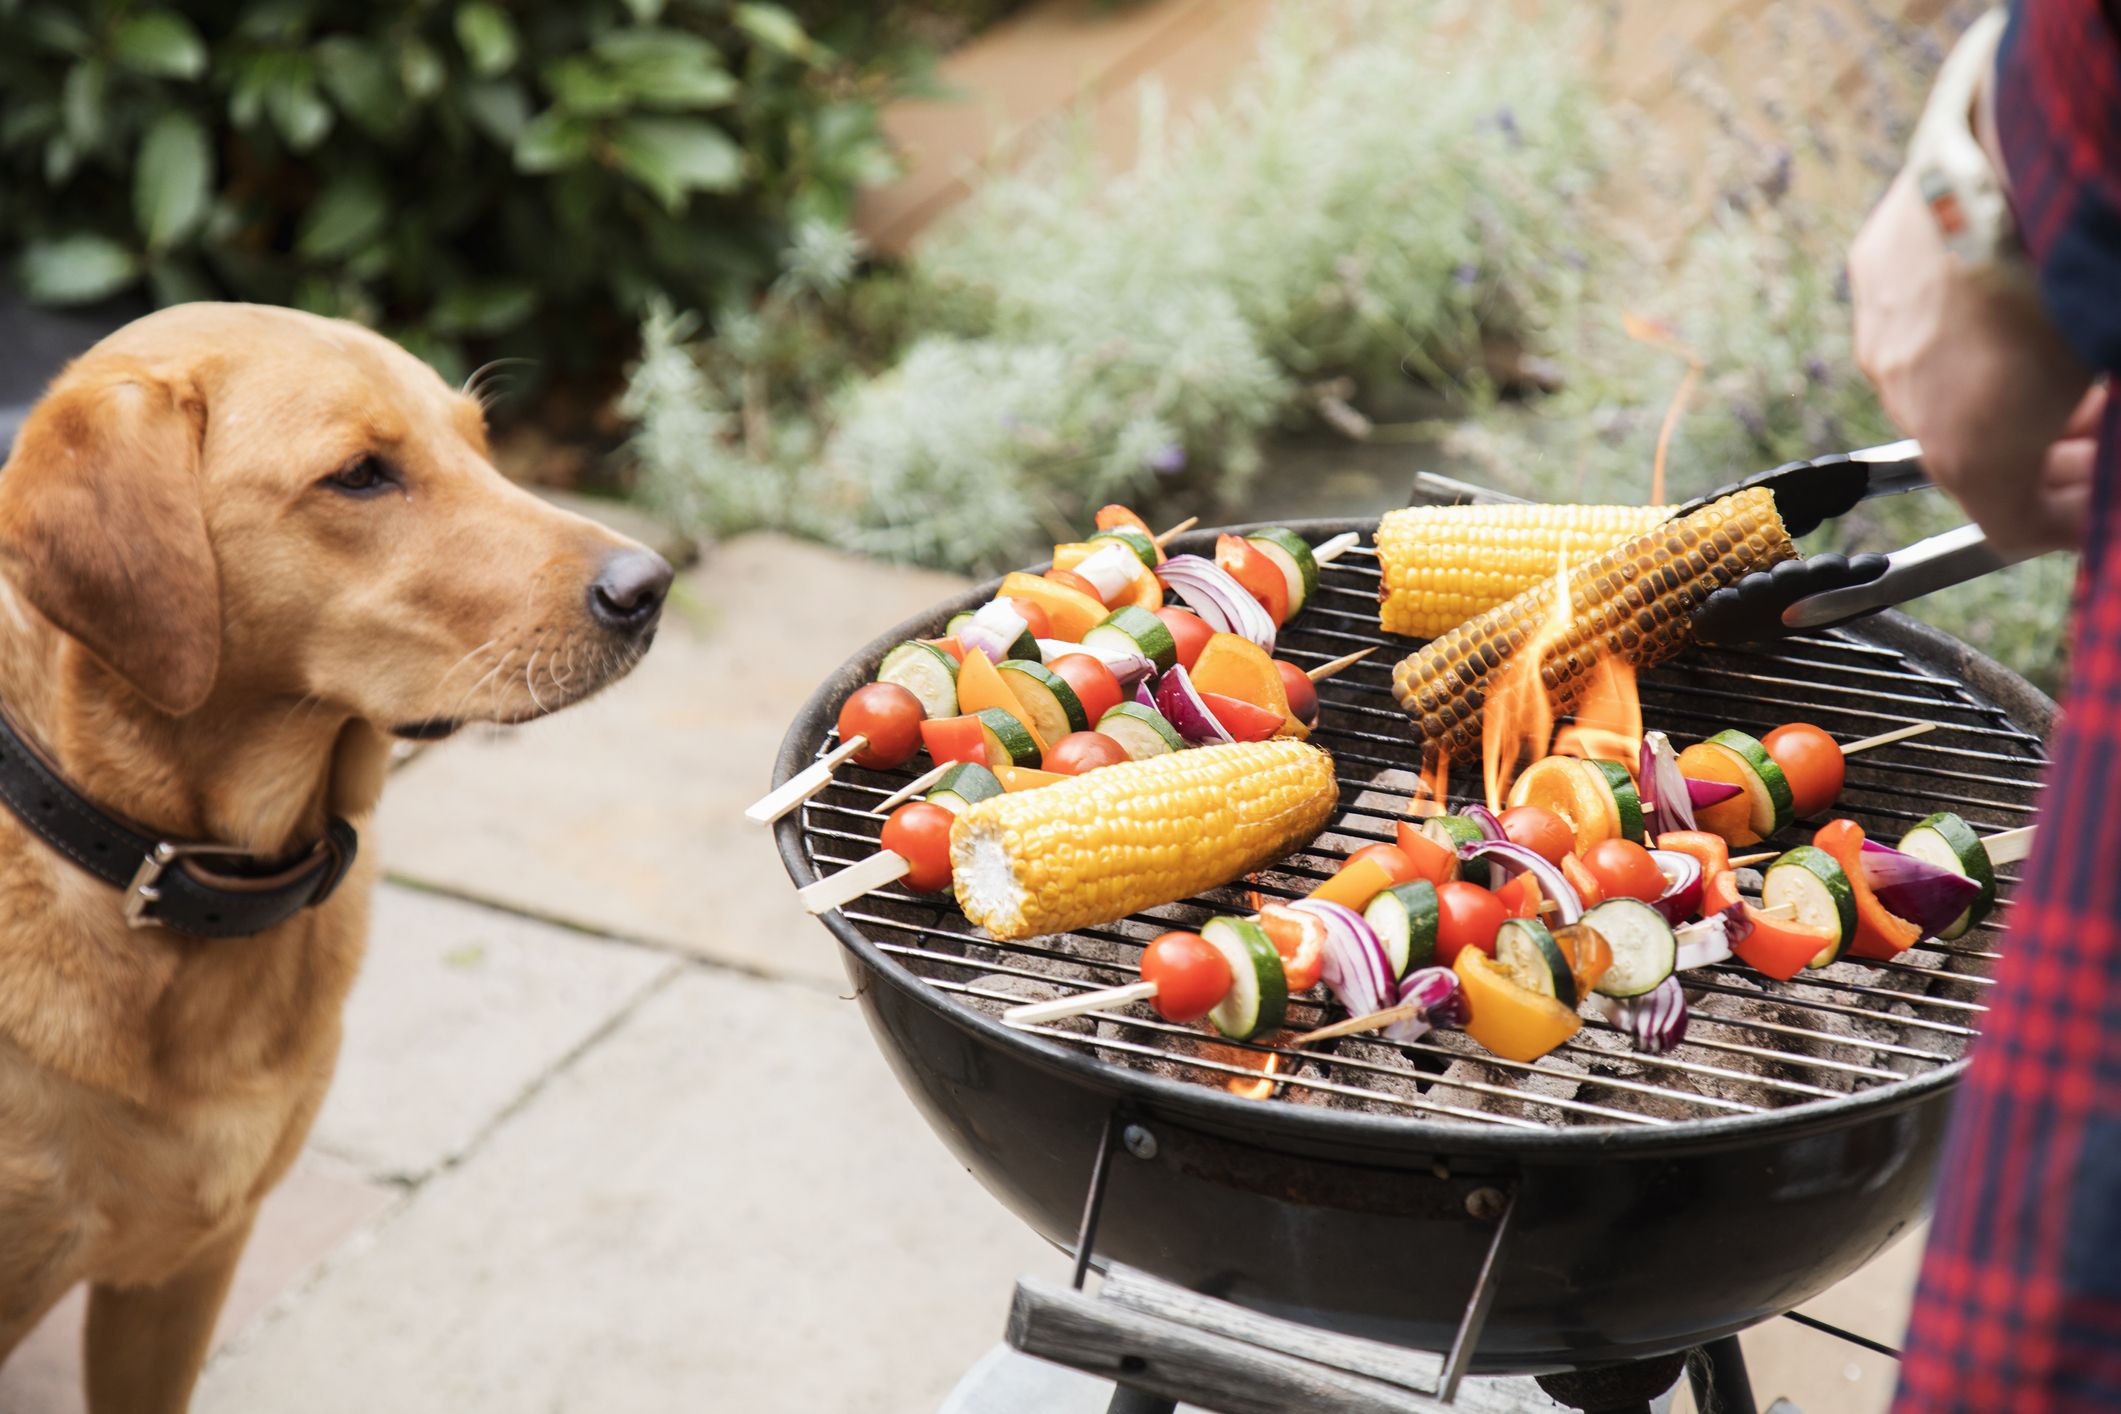 can dogs handle hot food